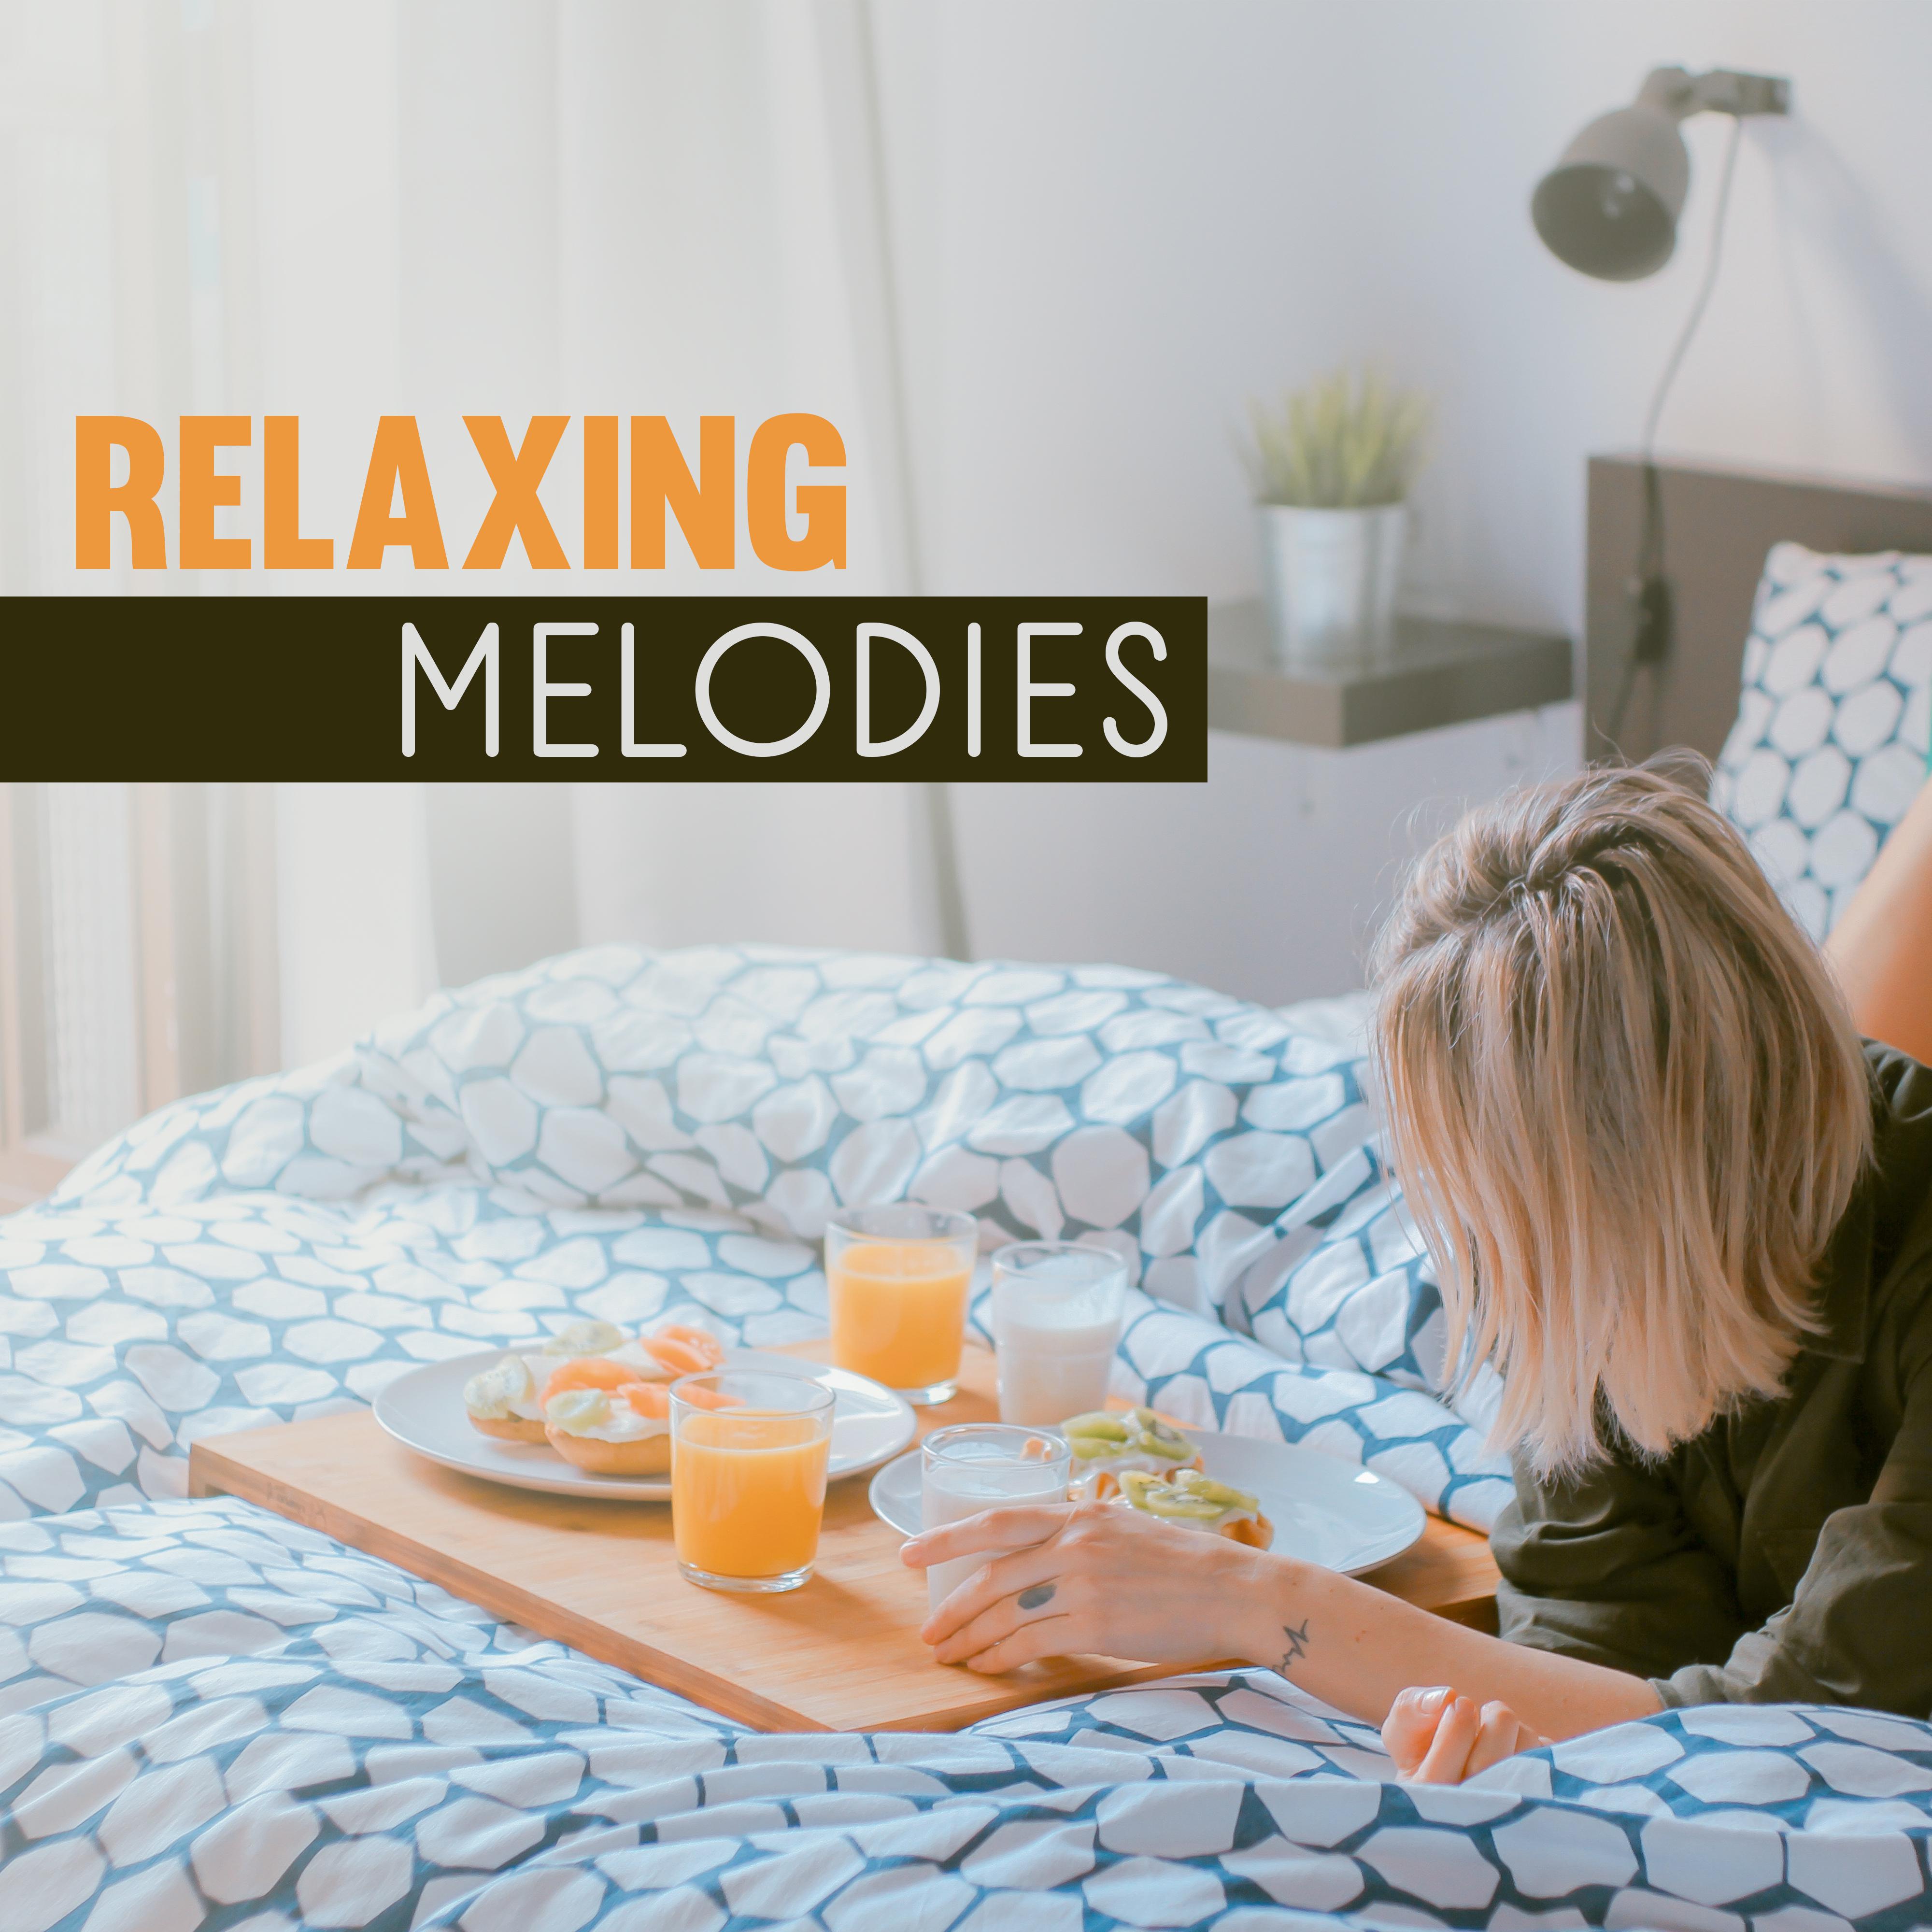 Relaxing Melodies  New Age Music to Rest, Zen Energy, Meditate, Chill  Relax, Peaceful Mind